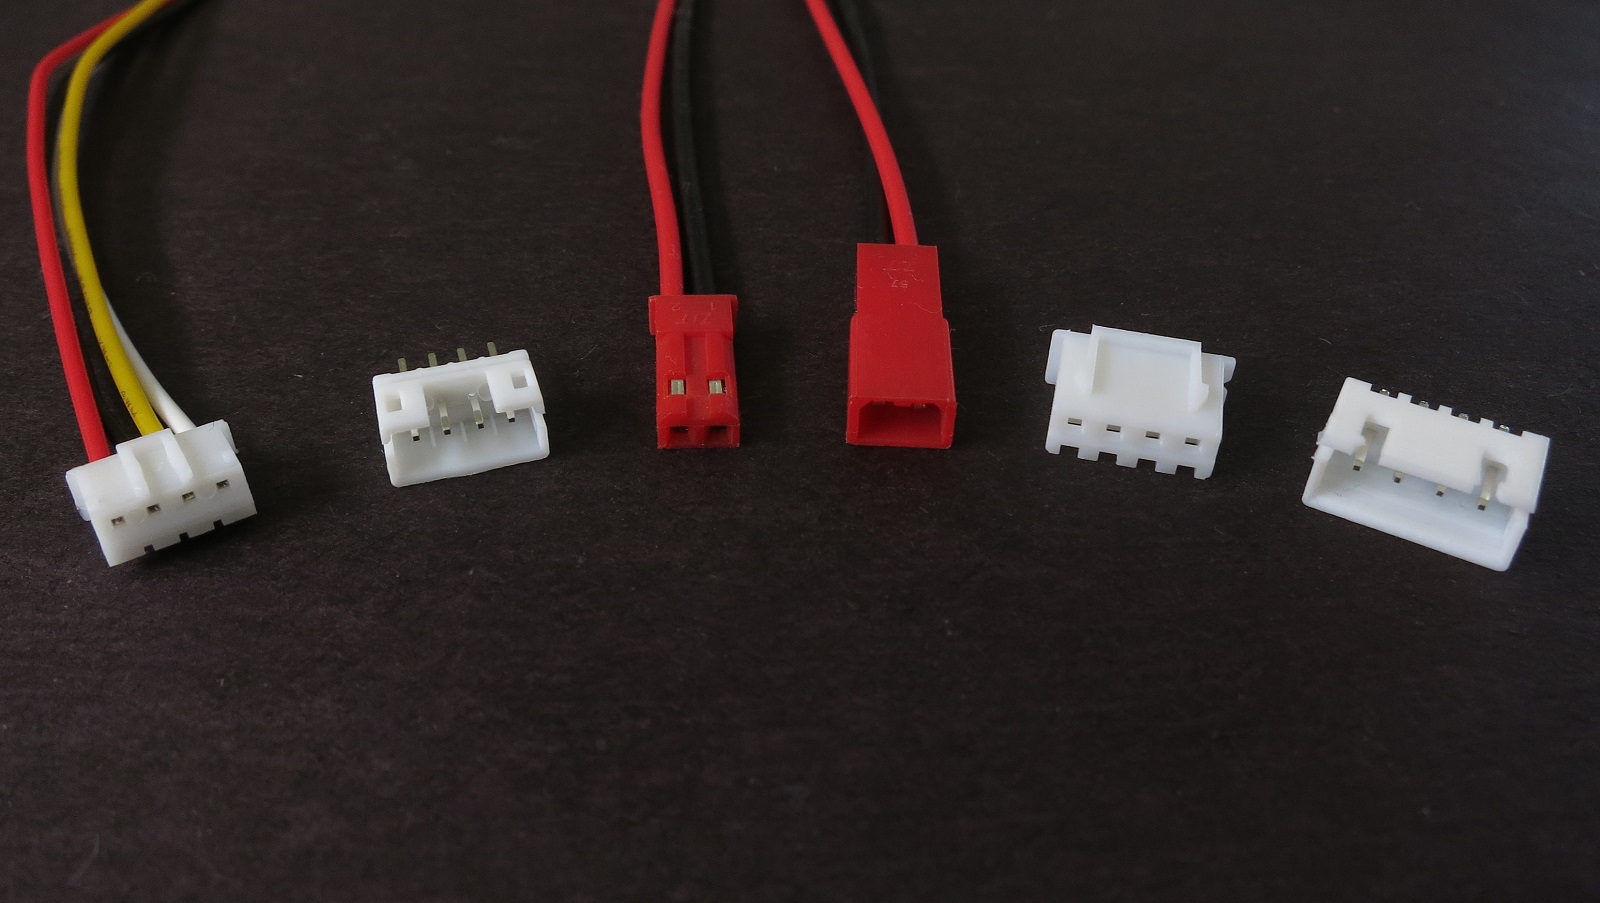 Micro JST PH 2.0mm 7 Pin Connector plug with Wires Cables 10 Sets